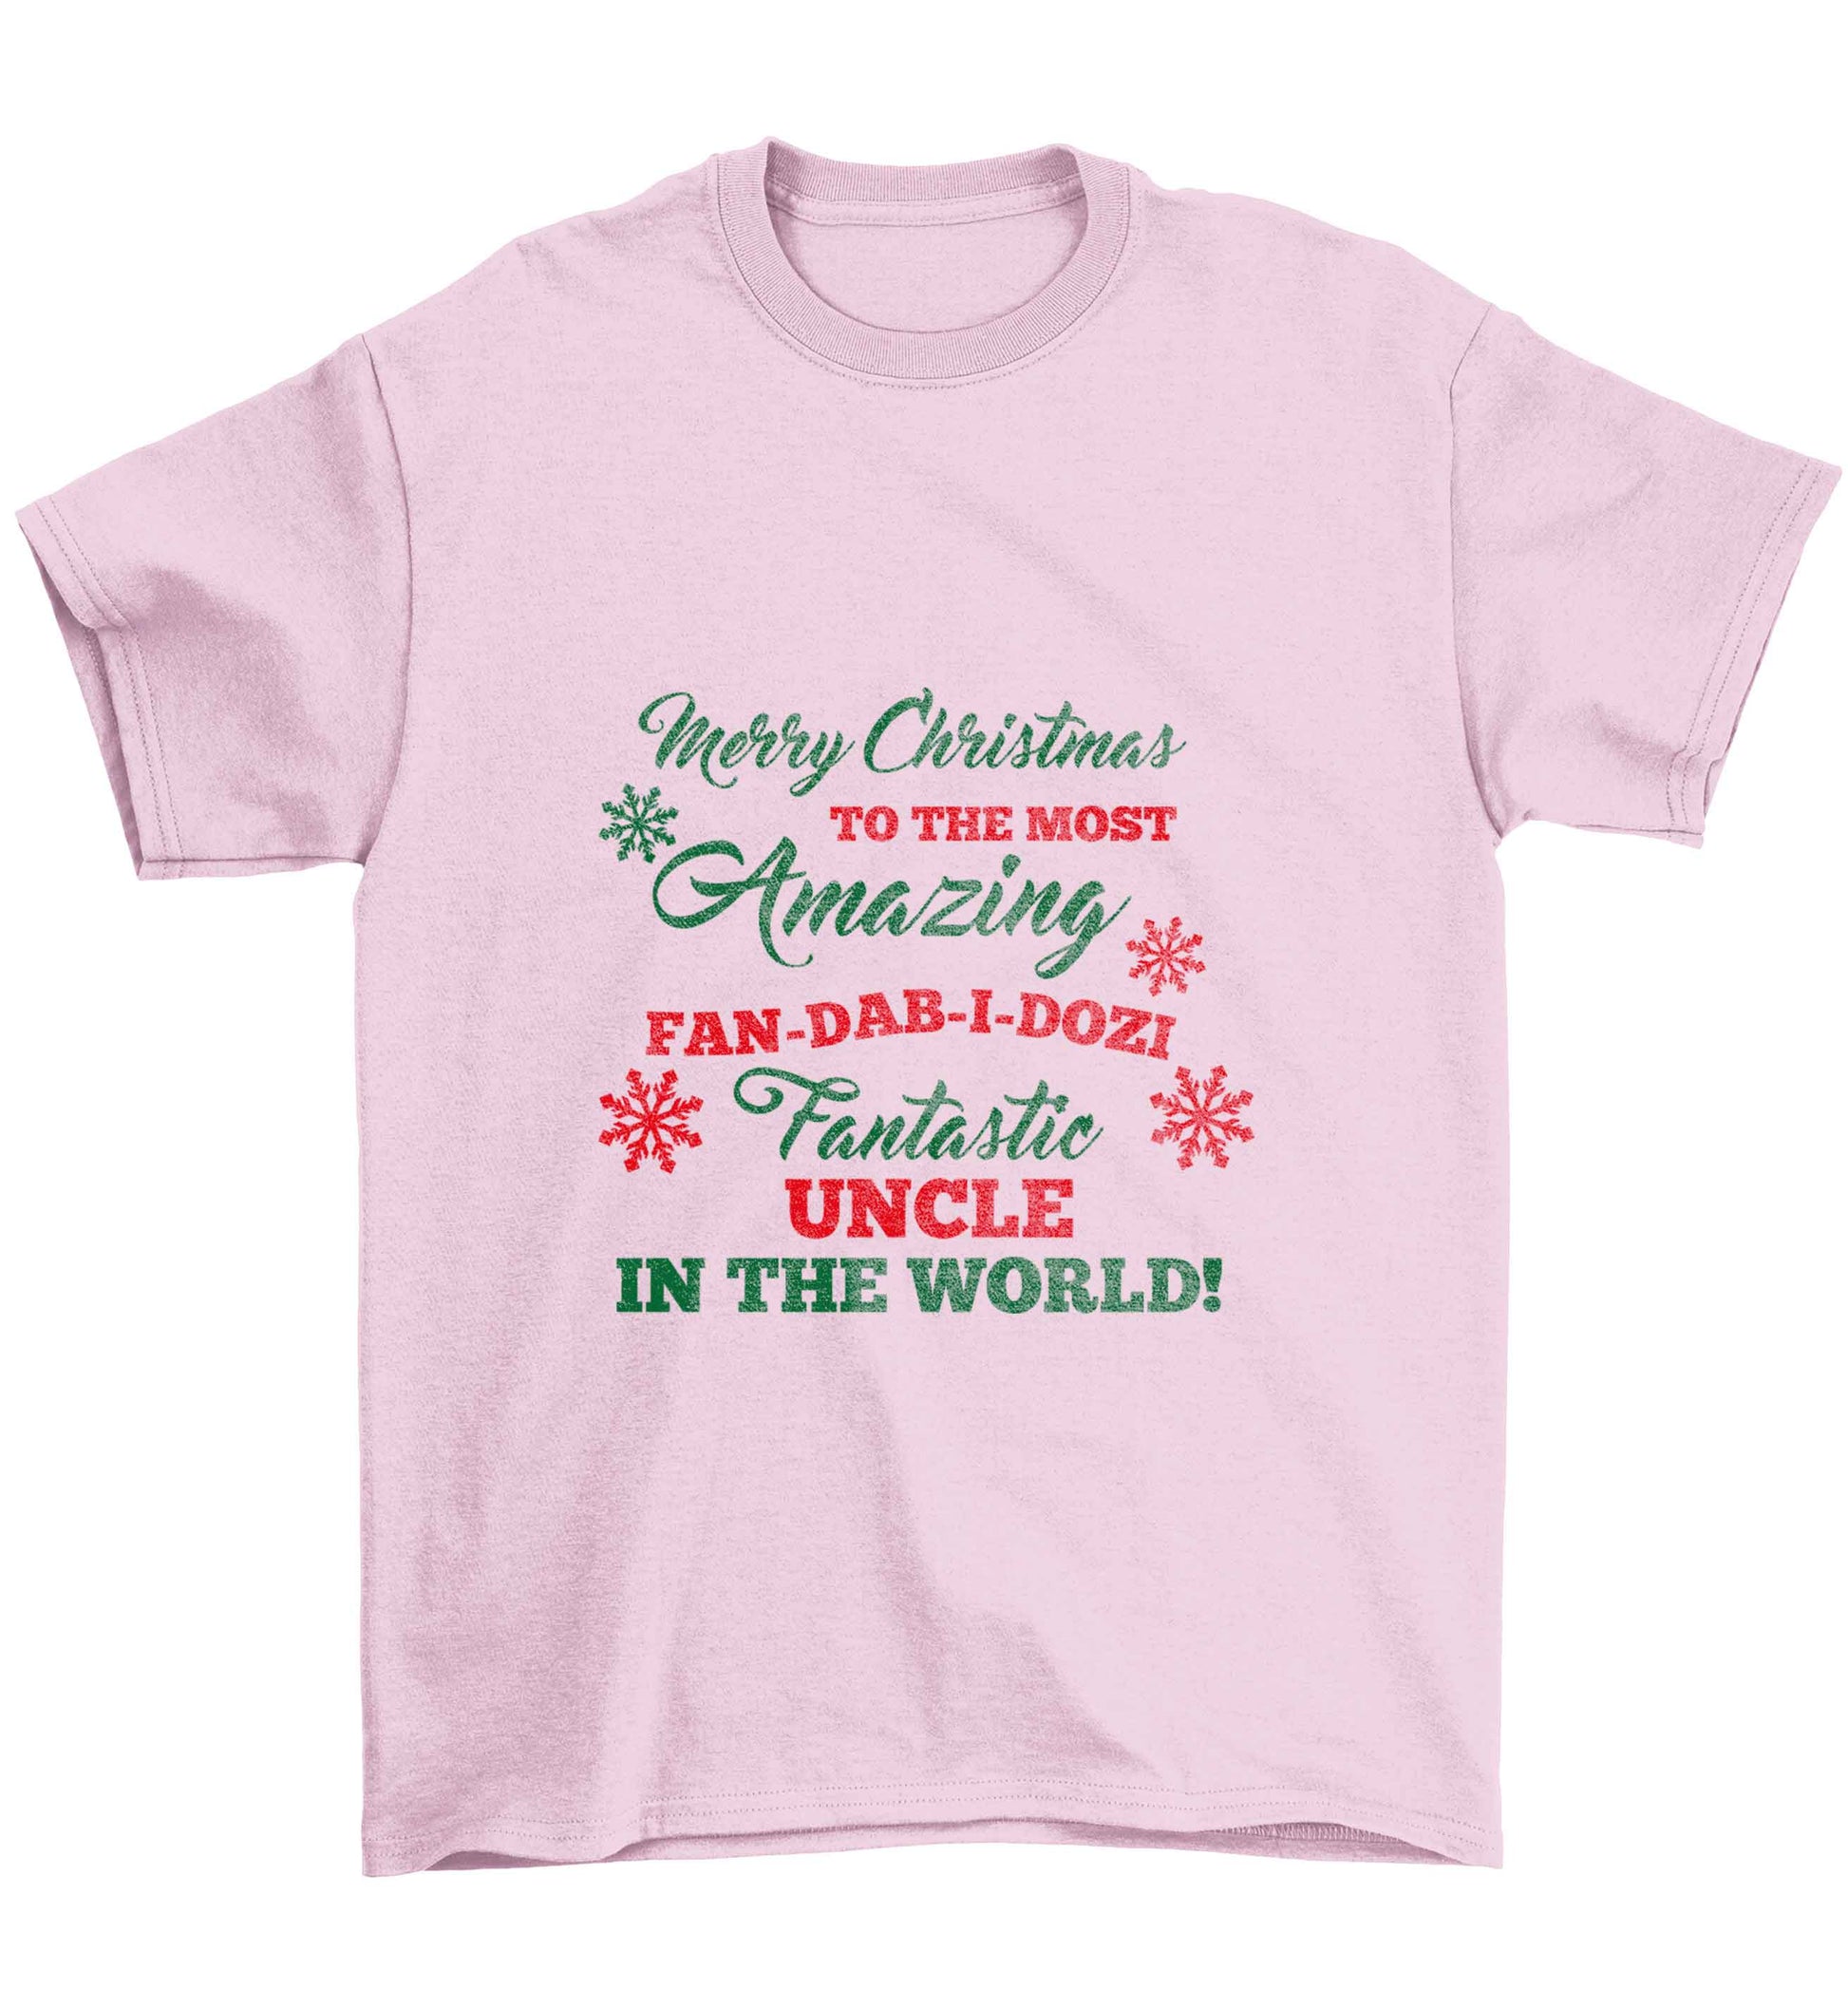 Merry Christmas to the most amazing fan-dab-i-dozi fantasic Uncle in the world Children's light pink Tshirt 12-13 Years